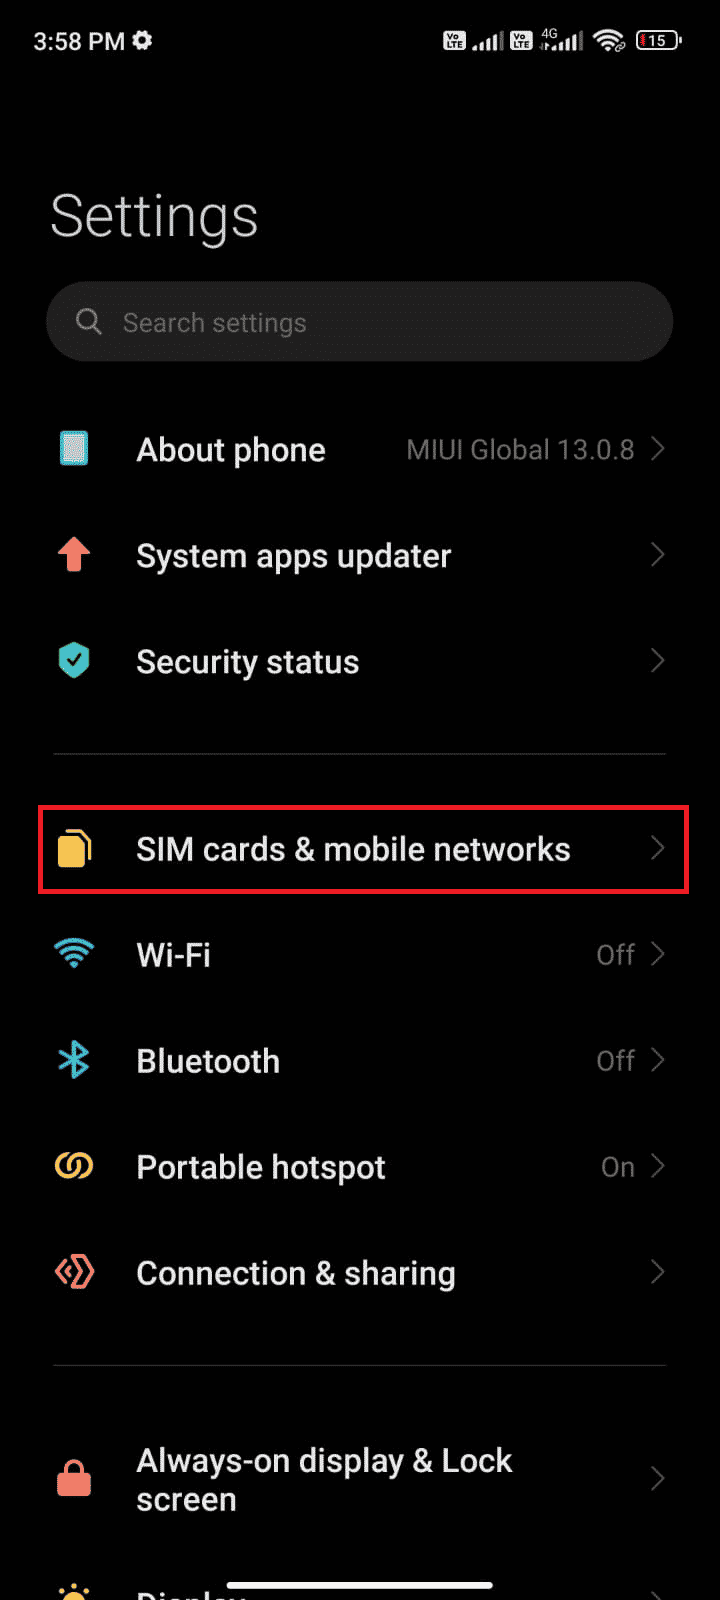 Then, tap the SIM cards mobile networks option 